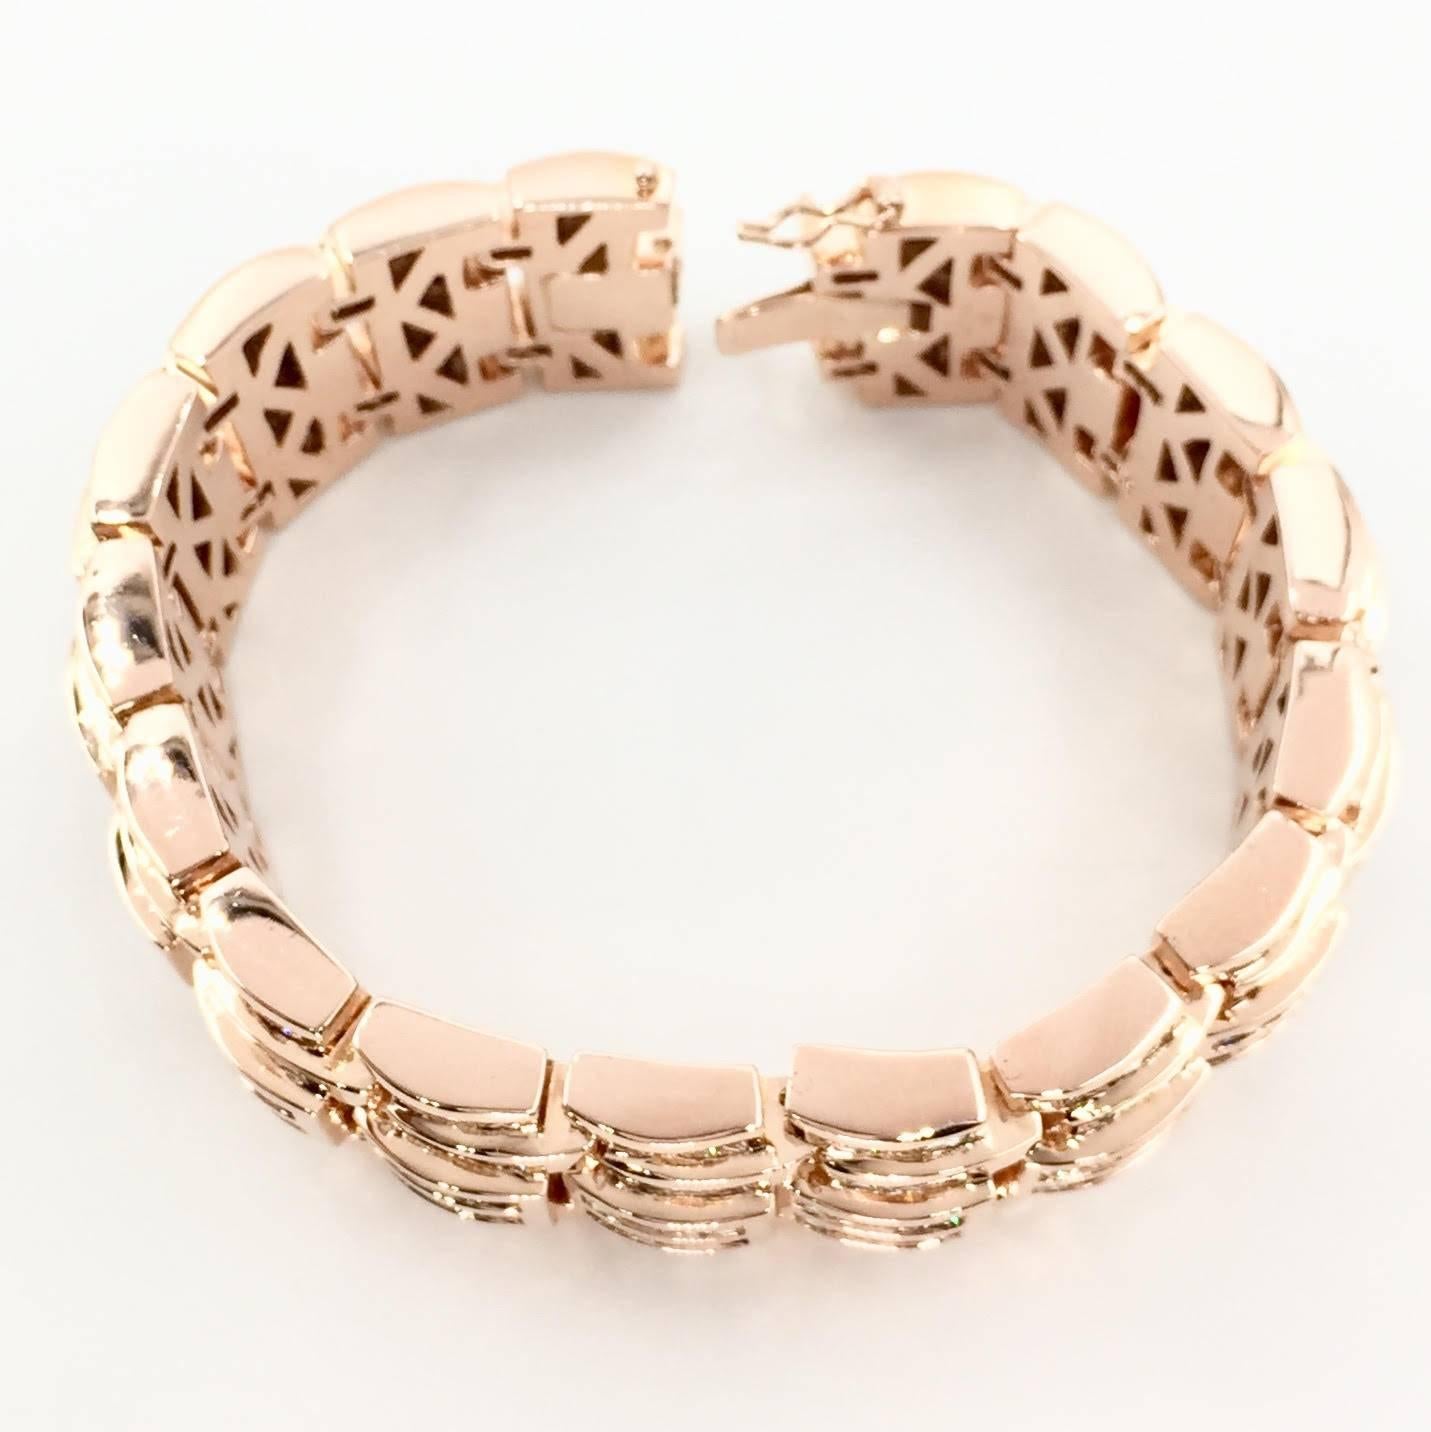 34 Carat Total Weight Diamond 14 Karat Rose Gold Wide Link Bracelet In Excellent Condition For Sale In Pikesville, MD